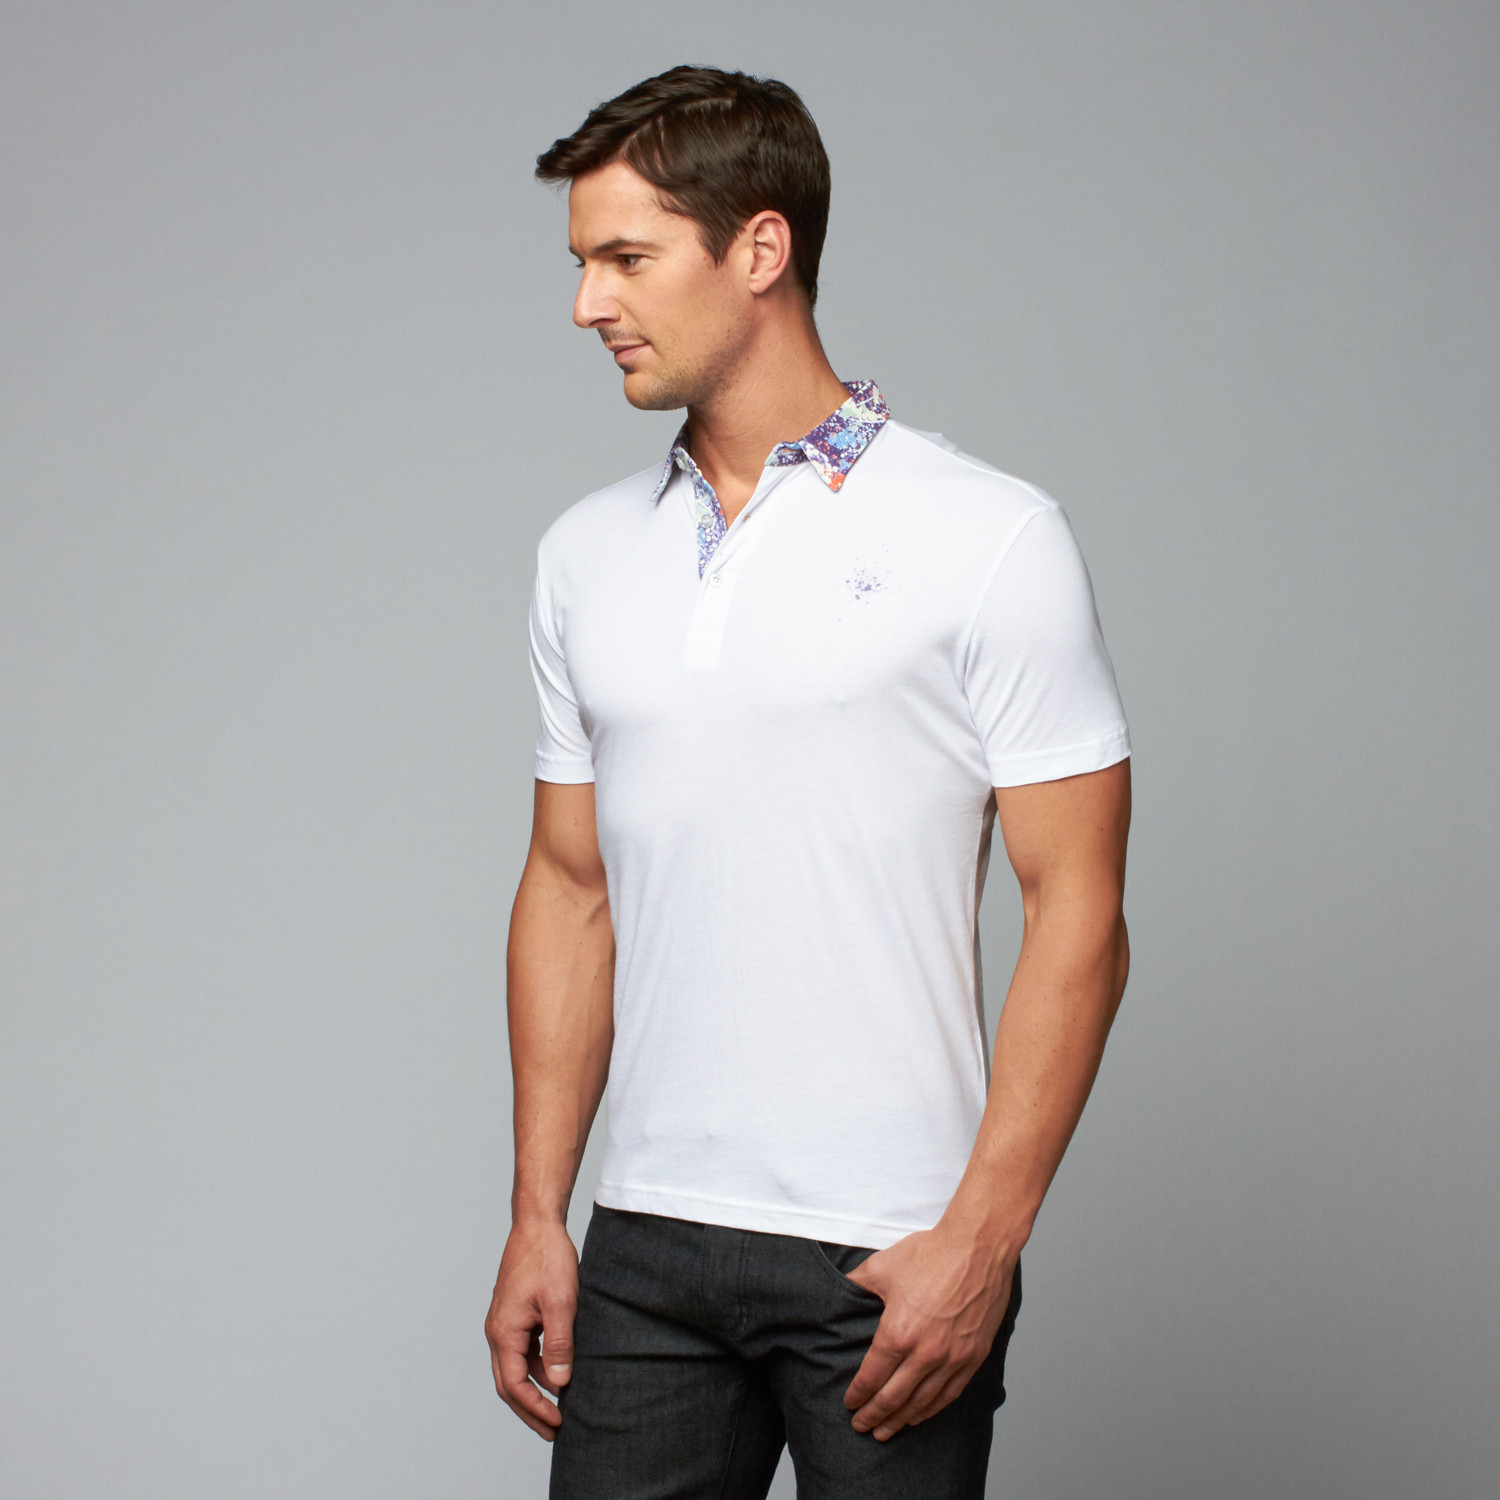 Drew’s Palette Polo // White (M) - 611 - Touch of Modern